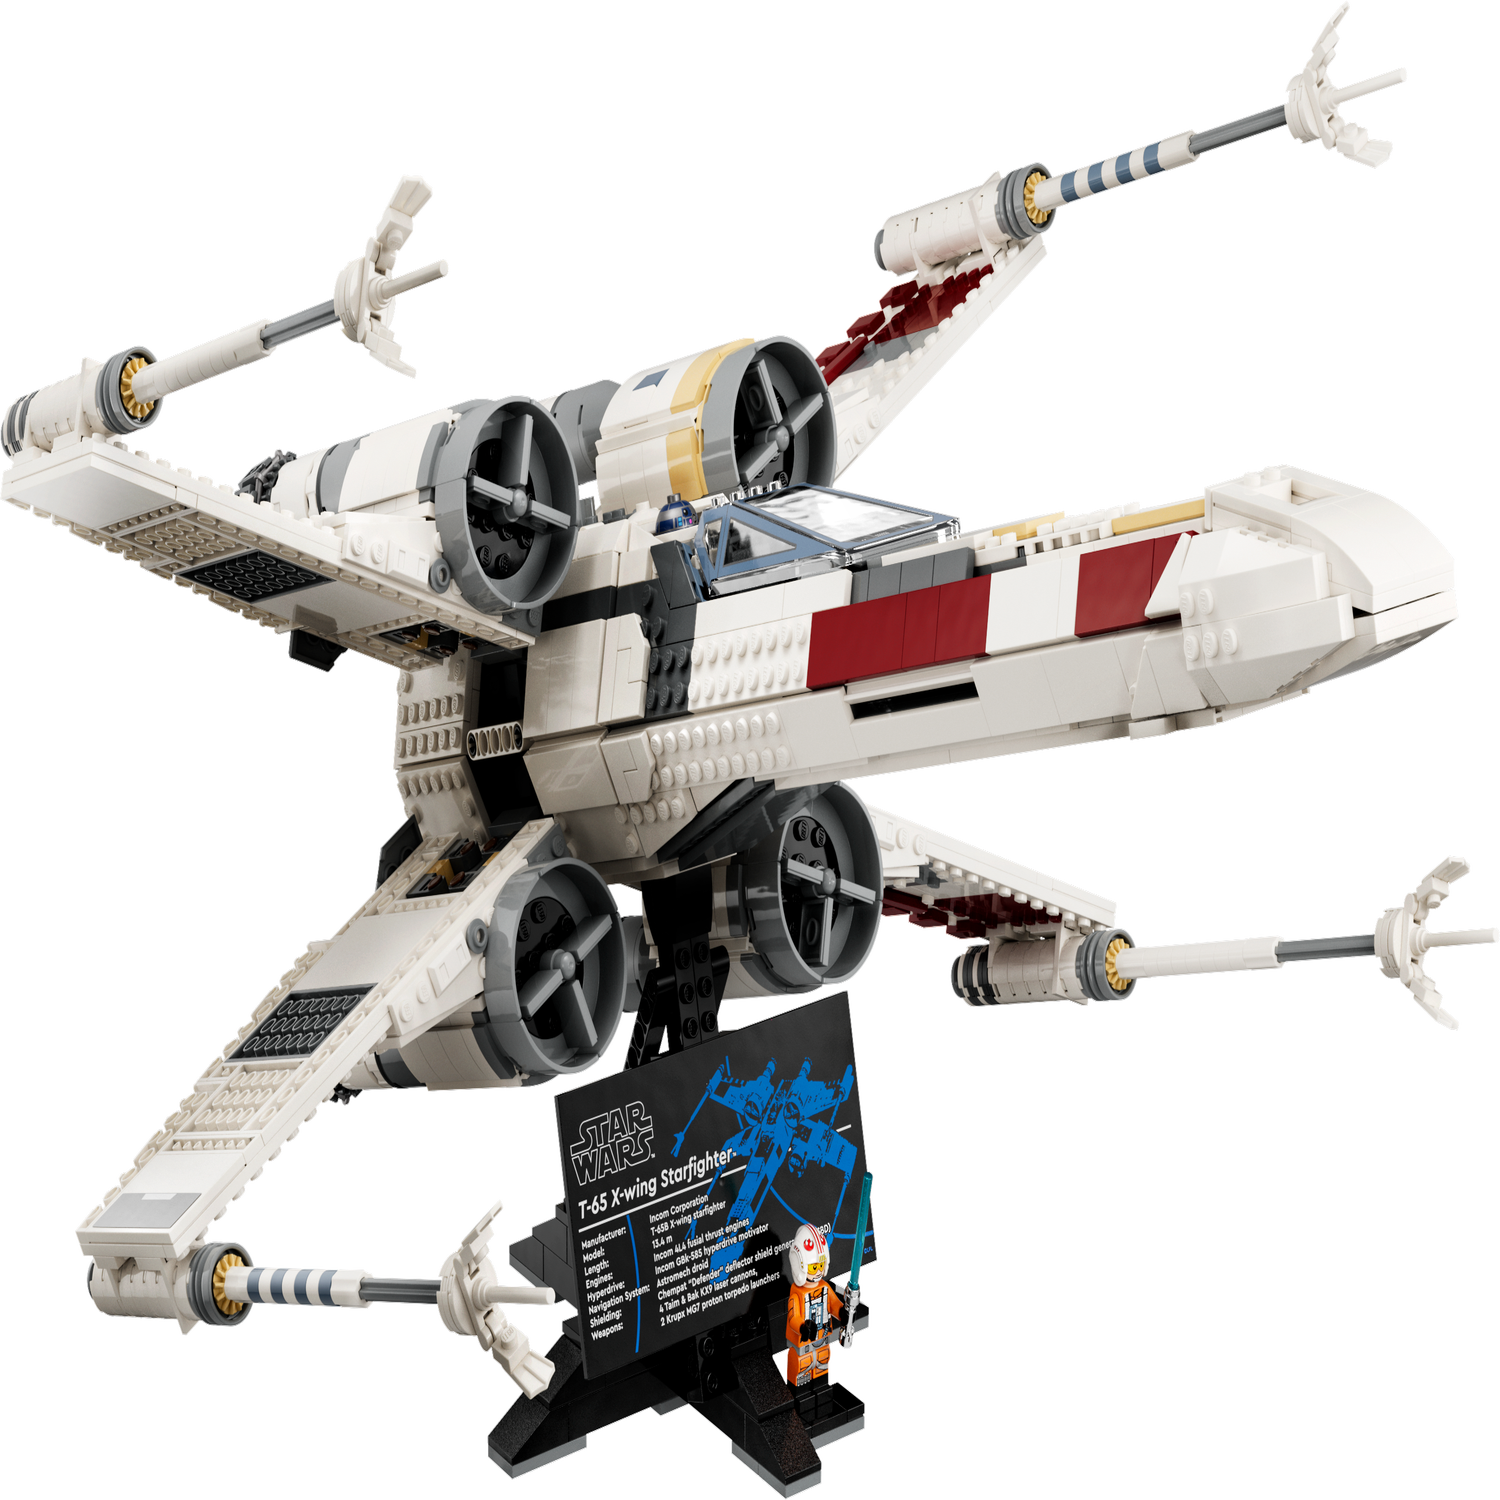 The LEGO Star Wars UCS X-Wing Starfighter Is Discounted for the